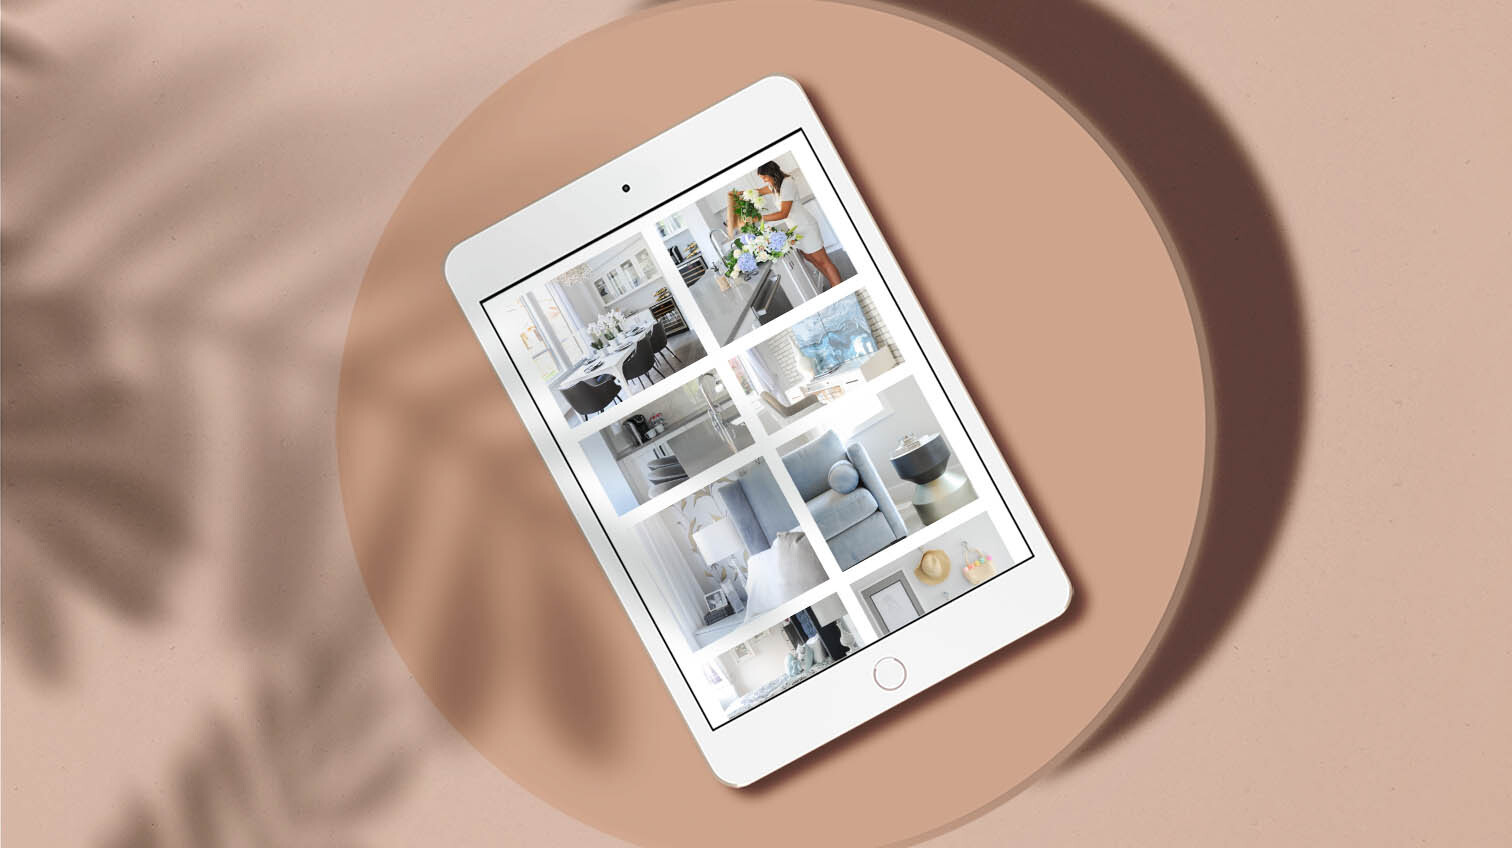 First Impressions website gallery shown on a tablet device - White Canvas Design